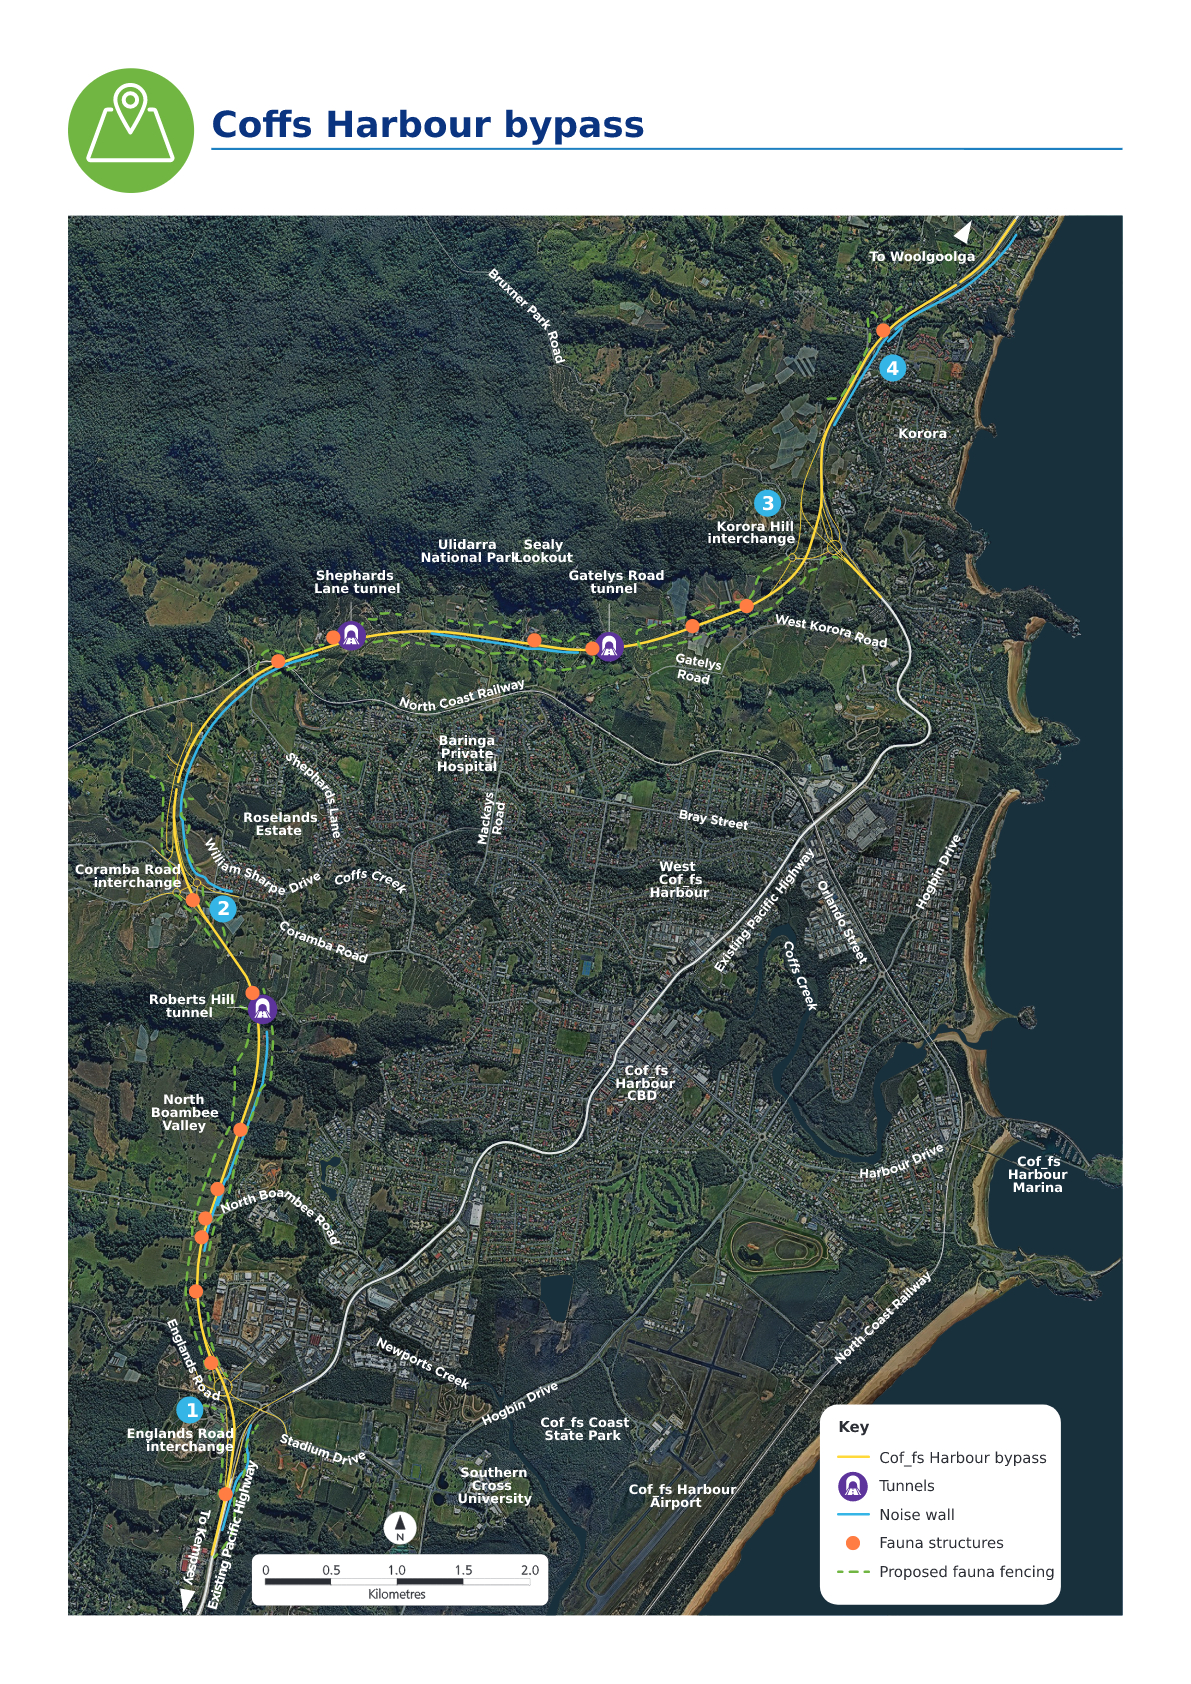 RMS9226_CoffsHarbour_route map December 2020_0-pdf